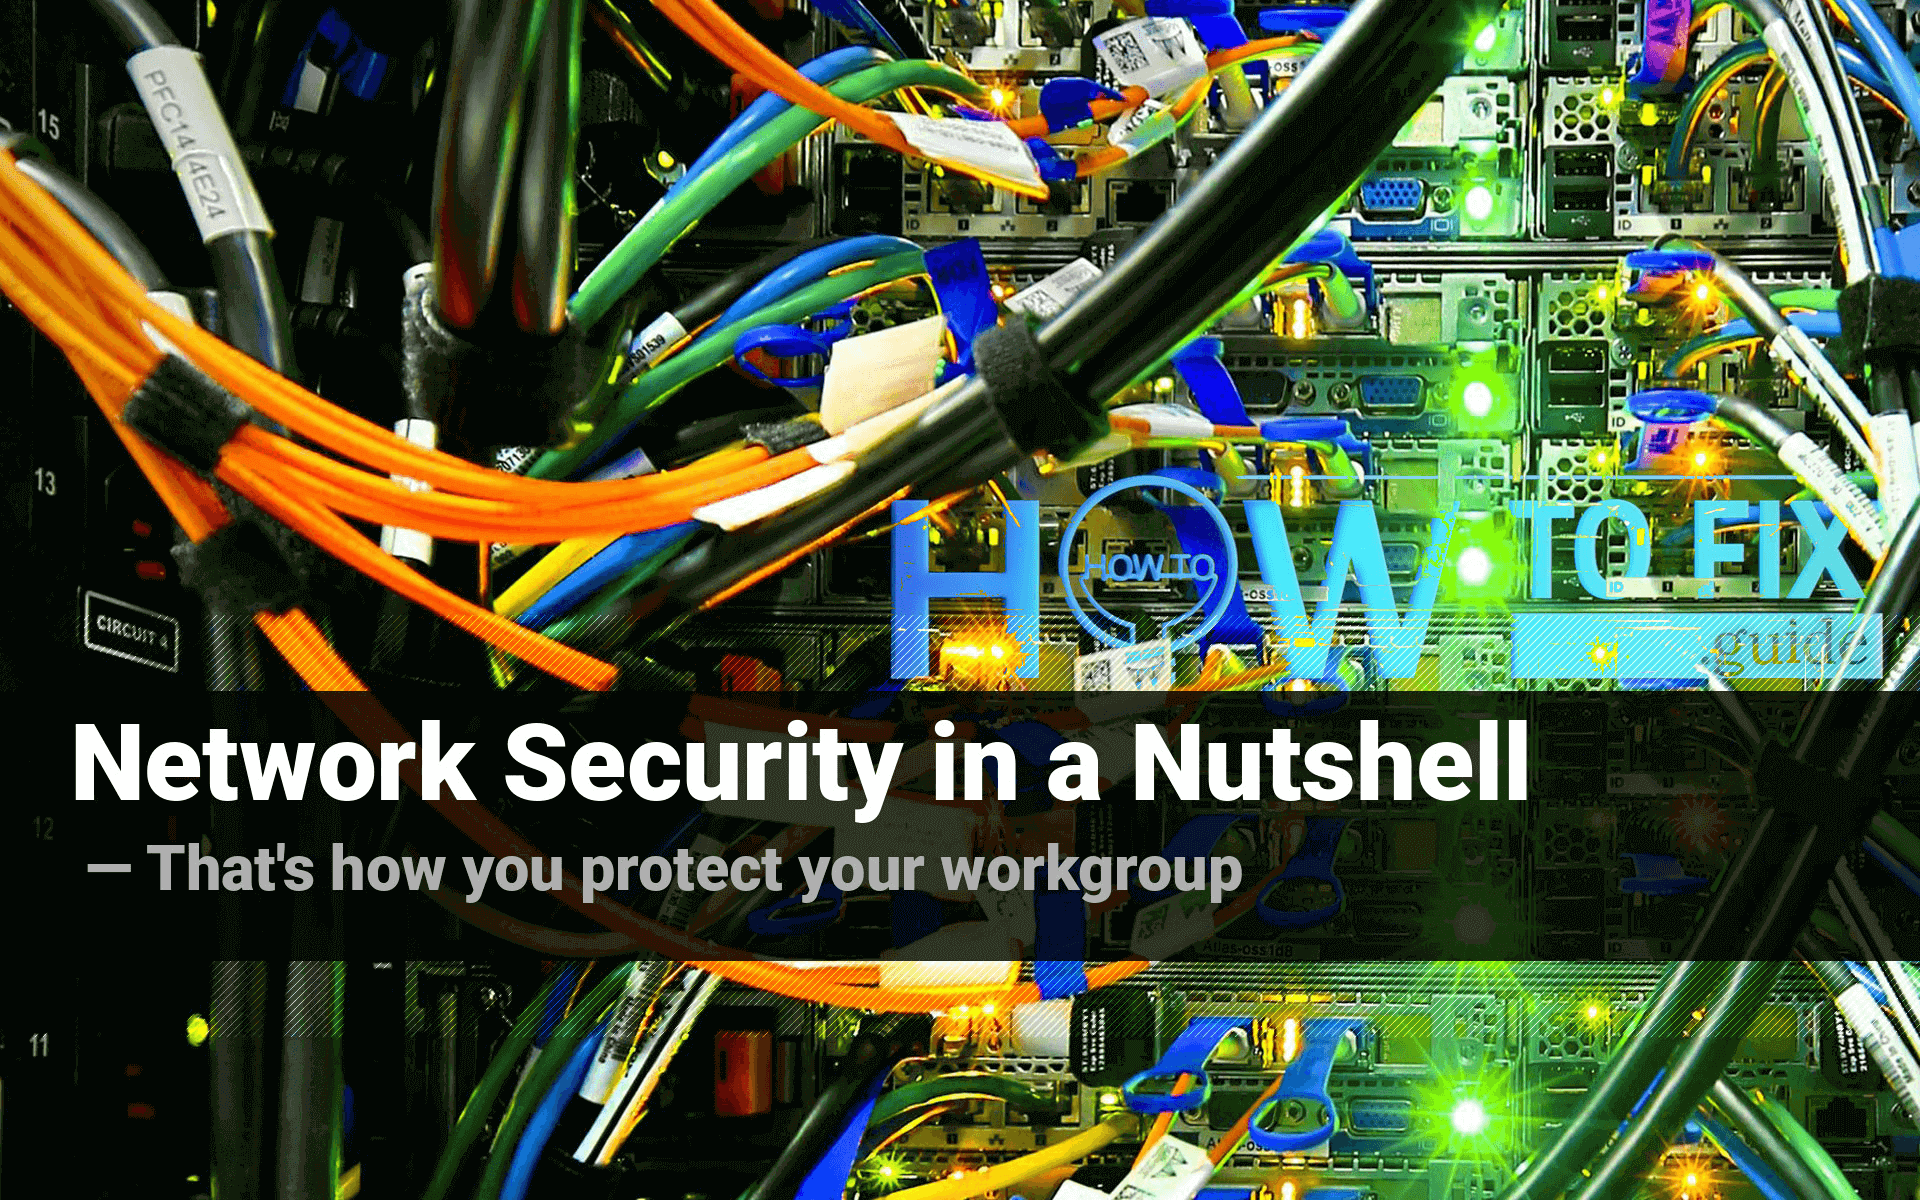 Network Security in a Nutshell. That's how you protect your workgroup